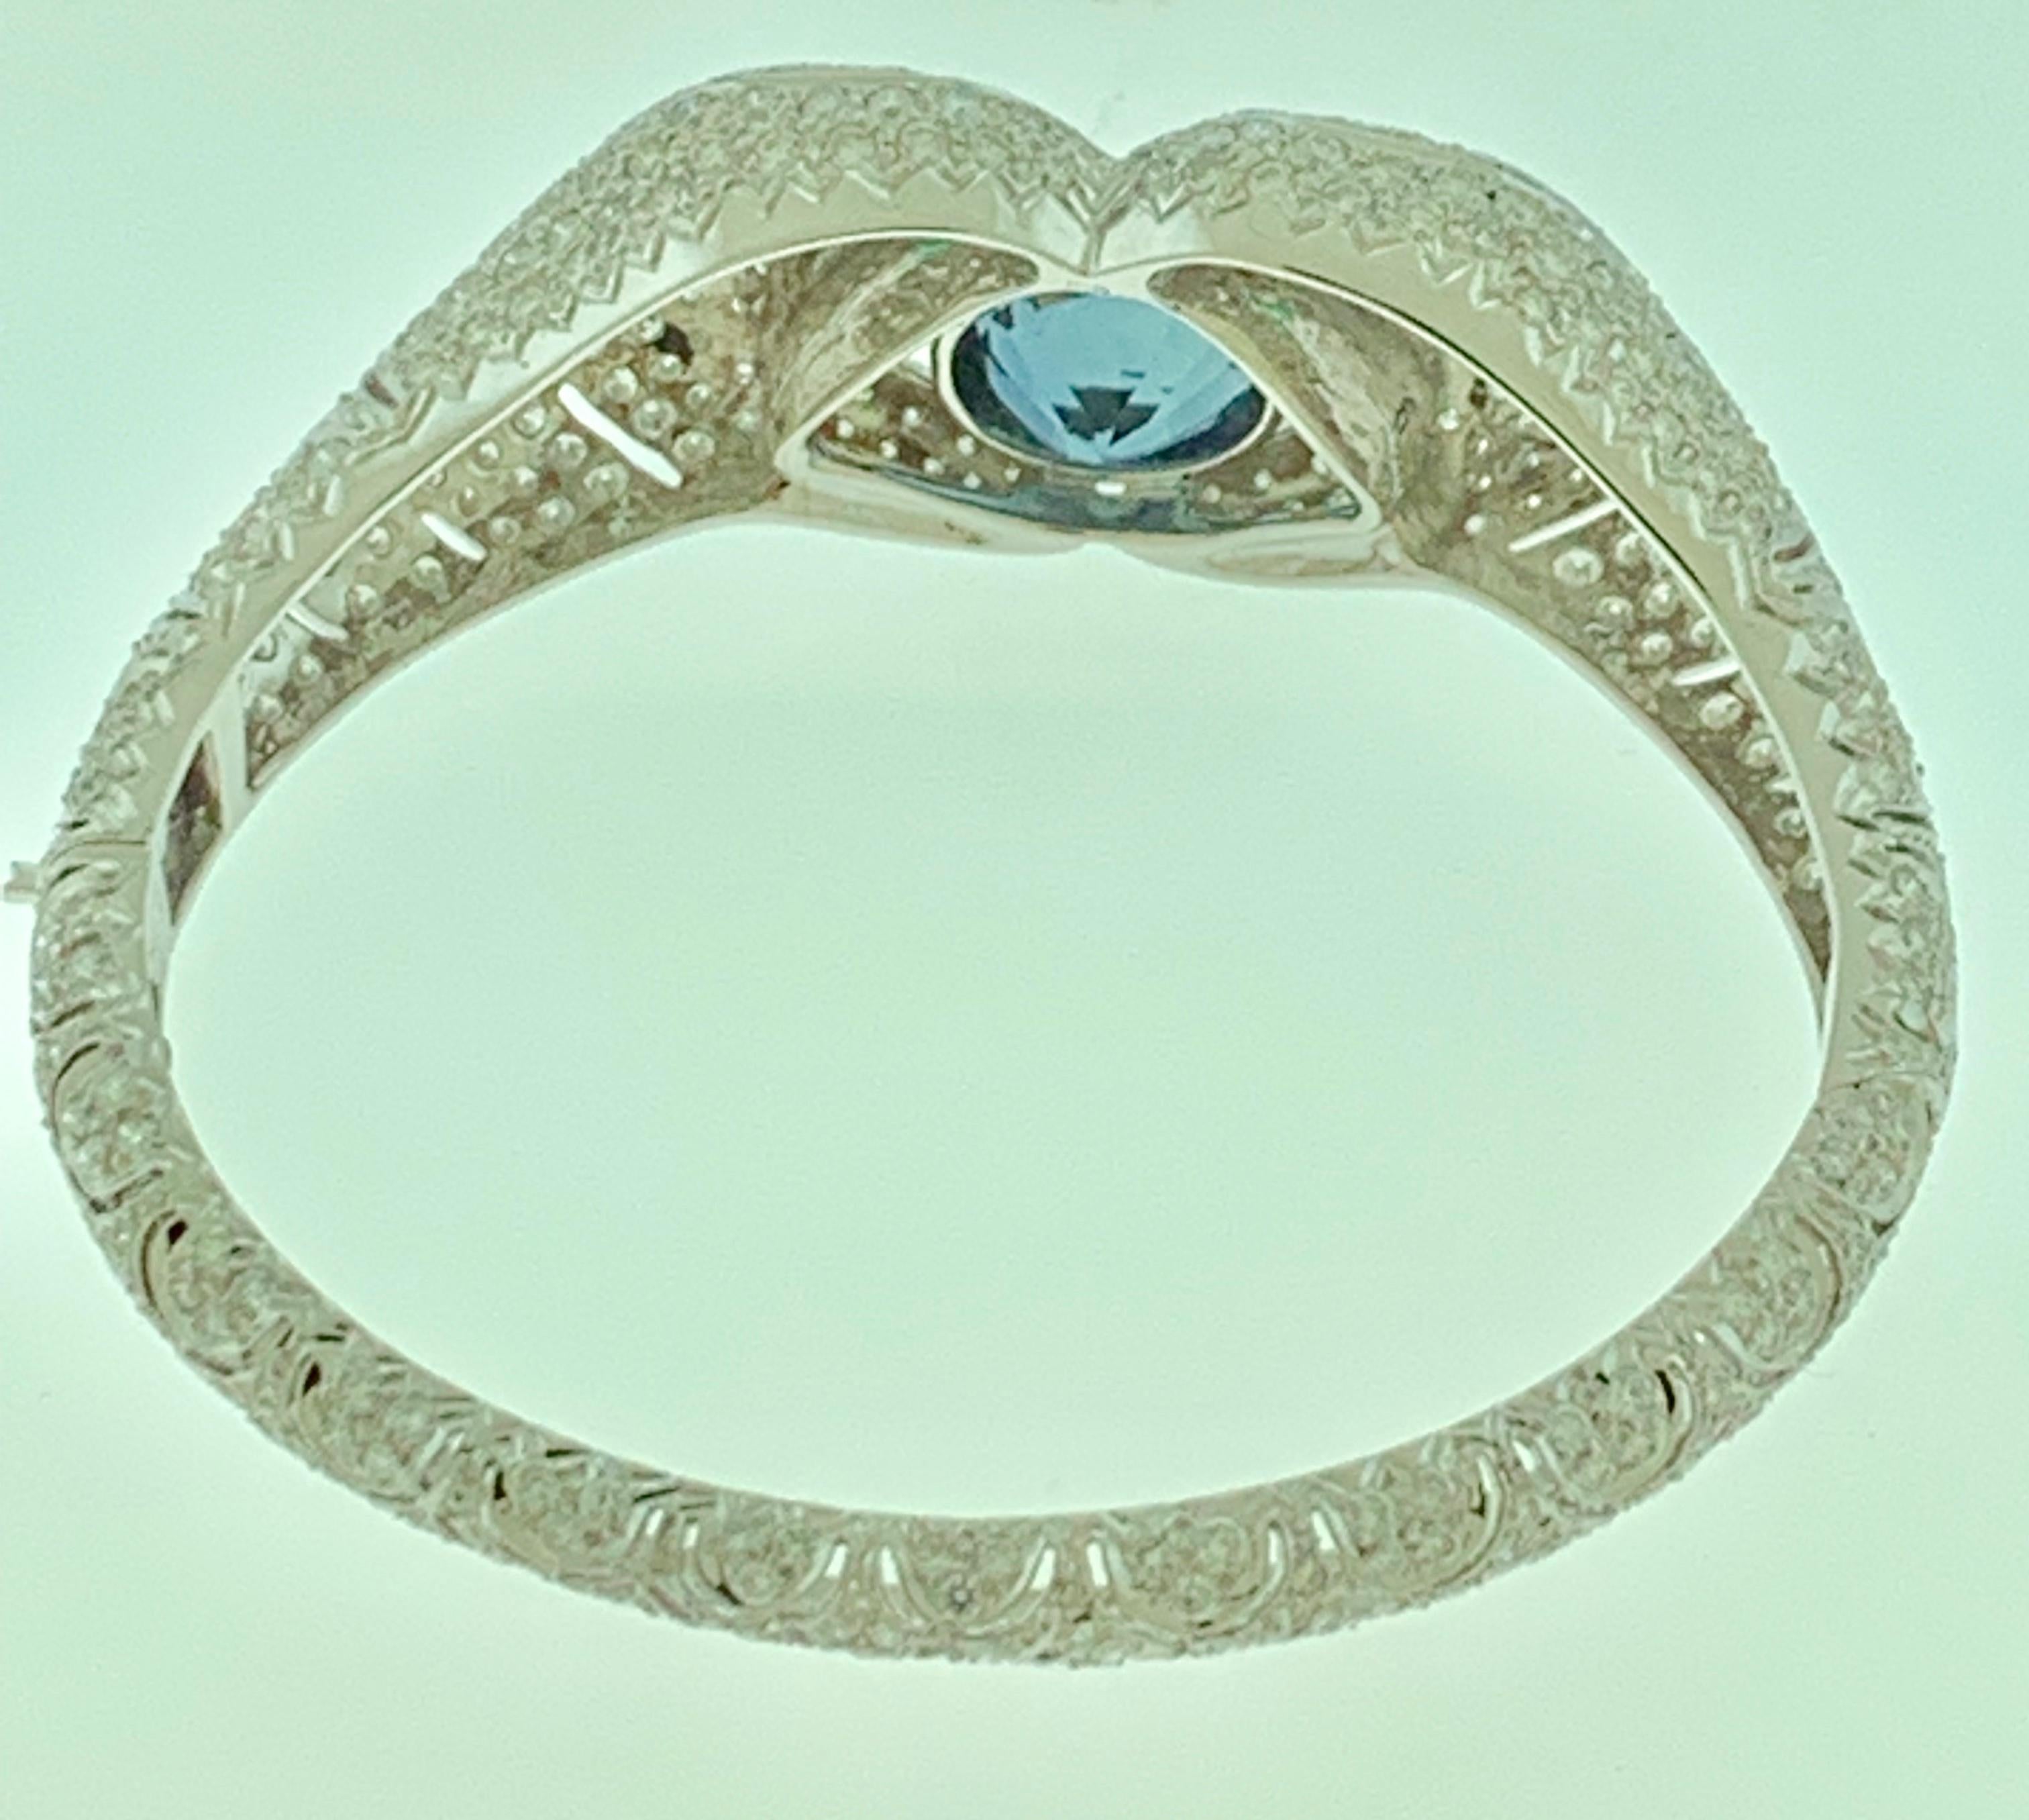 10.46 Ct Ceylon Sapphire & 21 Ct Diamonds 18 Kt White Gold Animal Snake Bangle In Excellent Condition For Sale In New York, NY